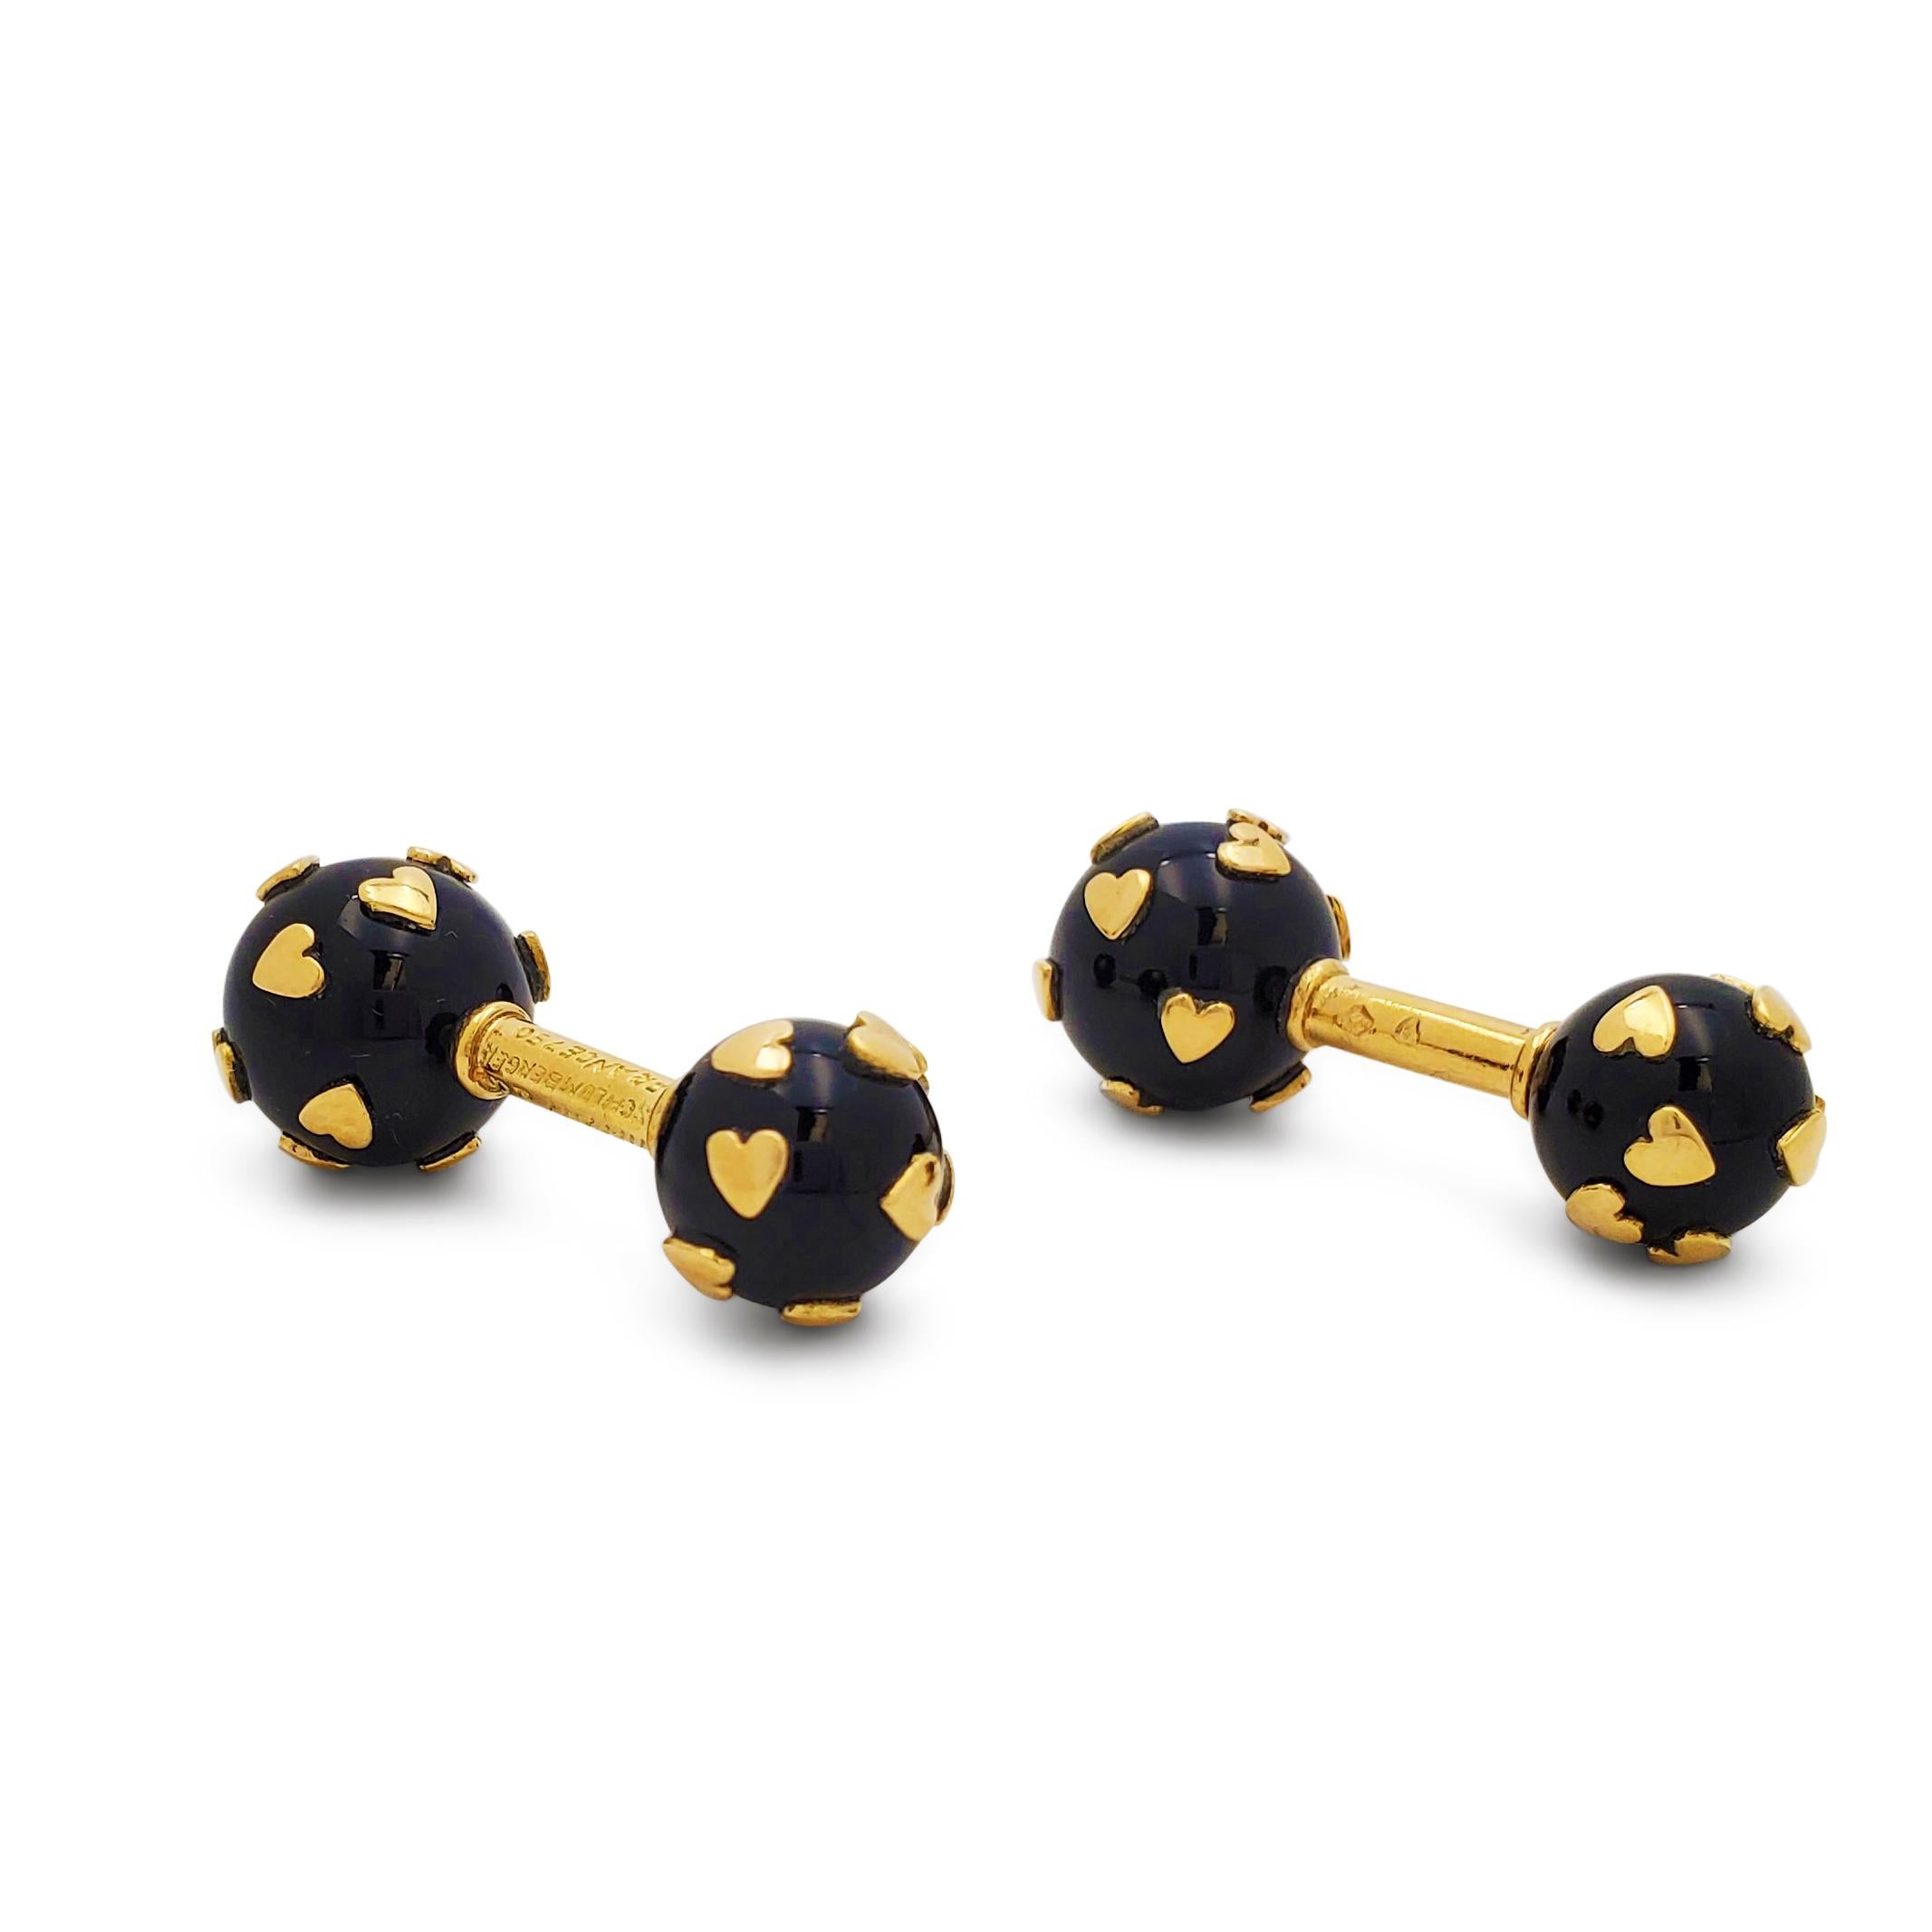 A charming pair of barbell cufflinks designed by Jean Schlumberger for Tiffany & Co.  Each cufflink end features an onyx sphere dotted with yellow gold hearts.  The larger end of each cufflink measures .48 inches wide, the smaller end measures .40